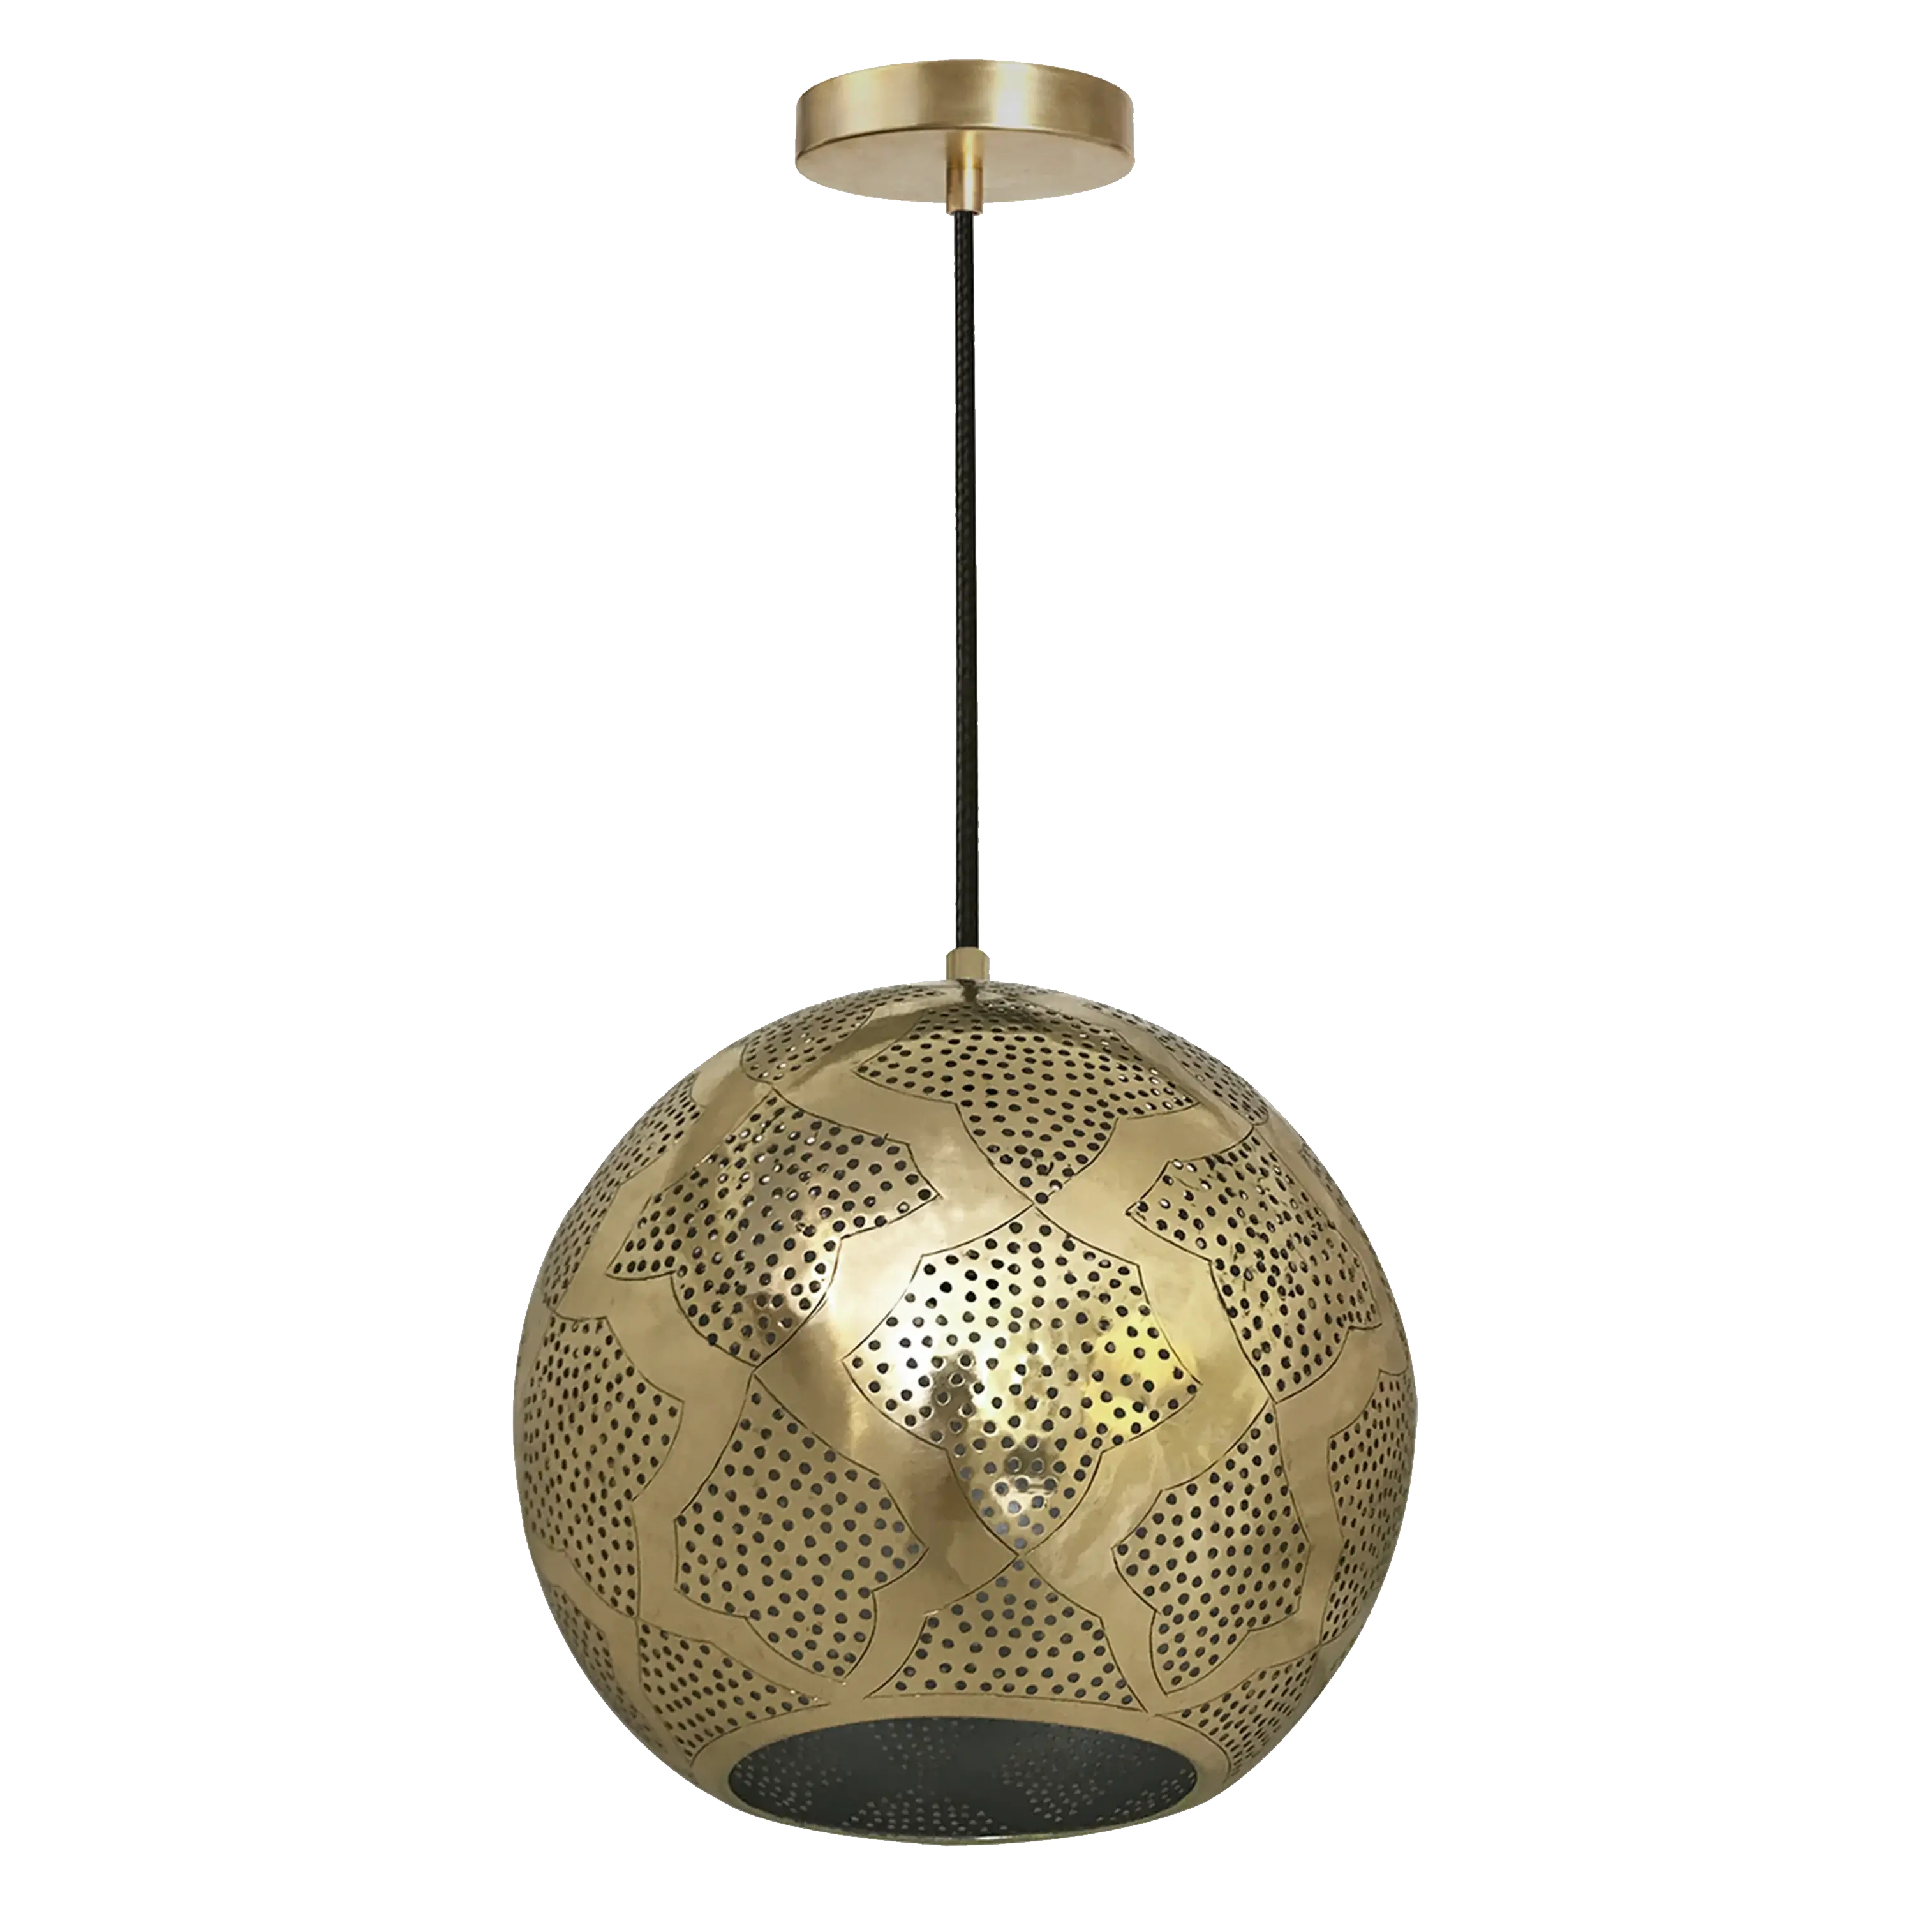 Dounia home Pendant light in Polished brass made of Metal, Model: Warda